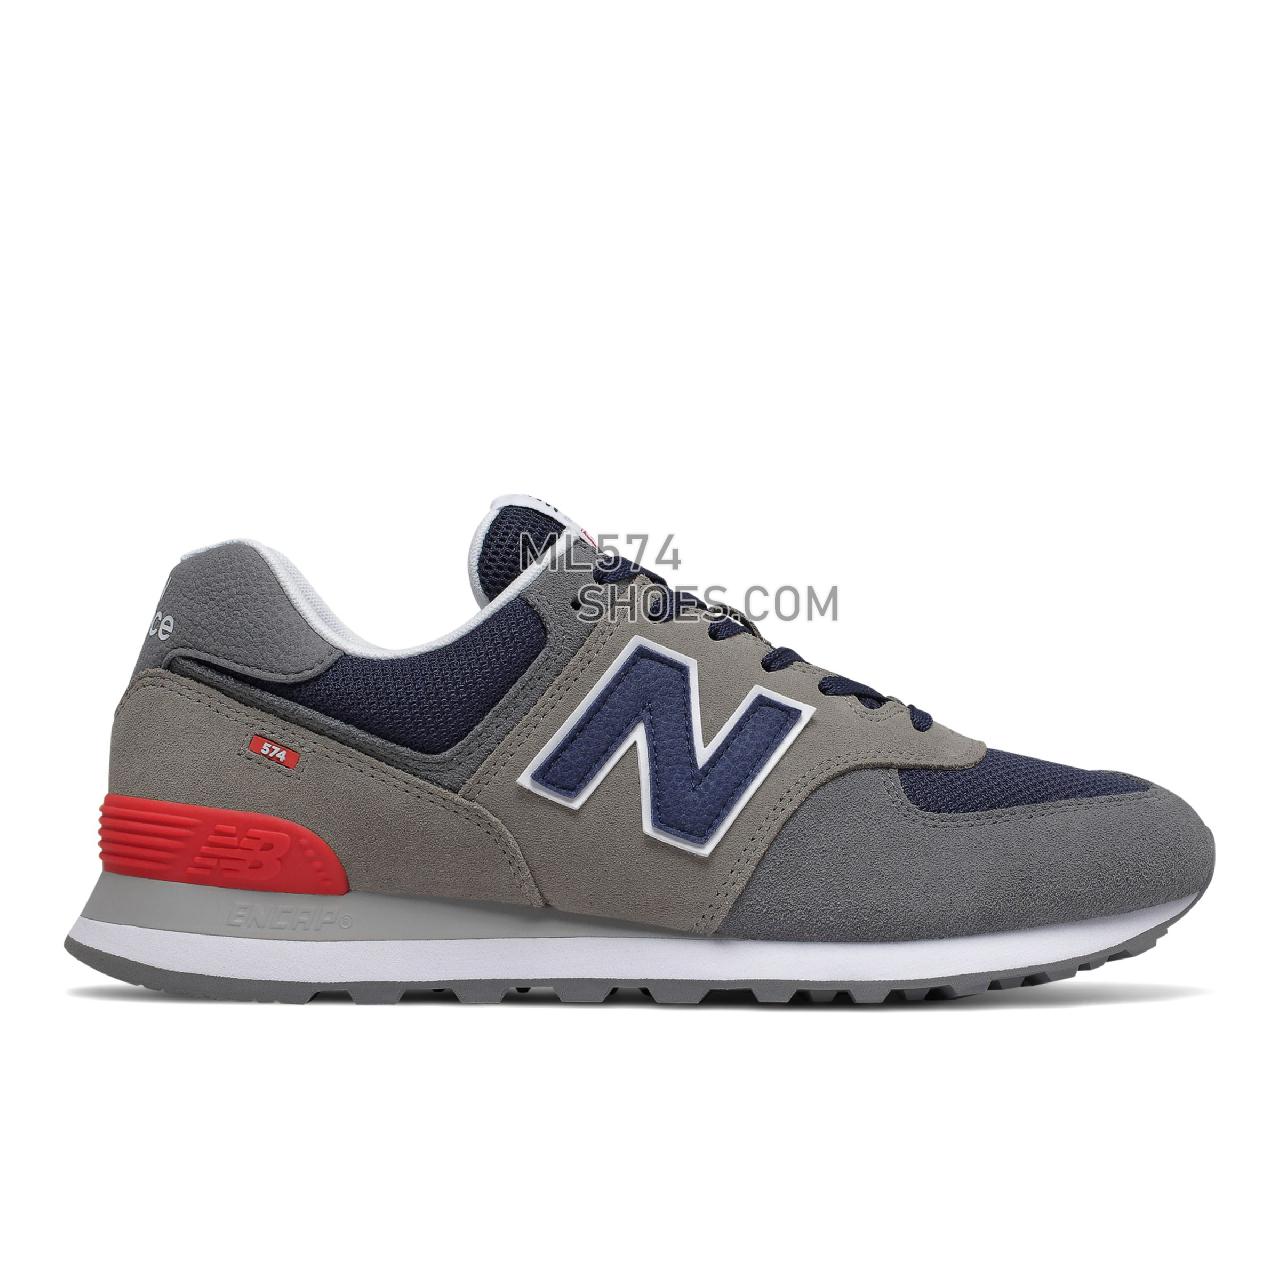 New Balance 574v2 - Men's Classic Sneakers - Marblehead with Pigment - ML574EAD